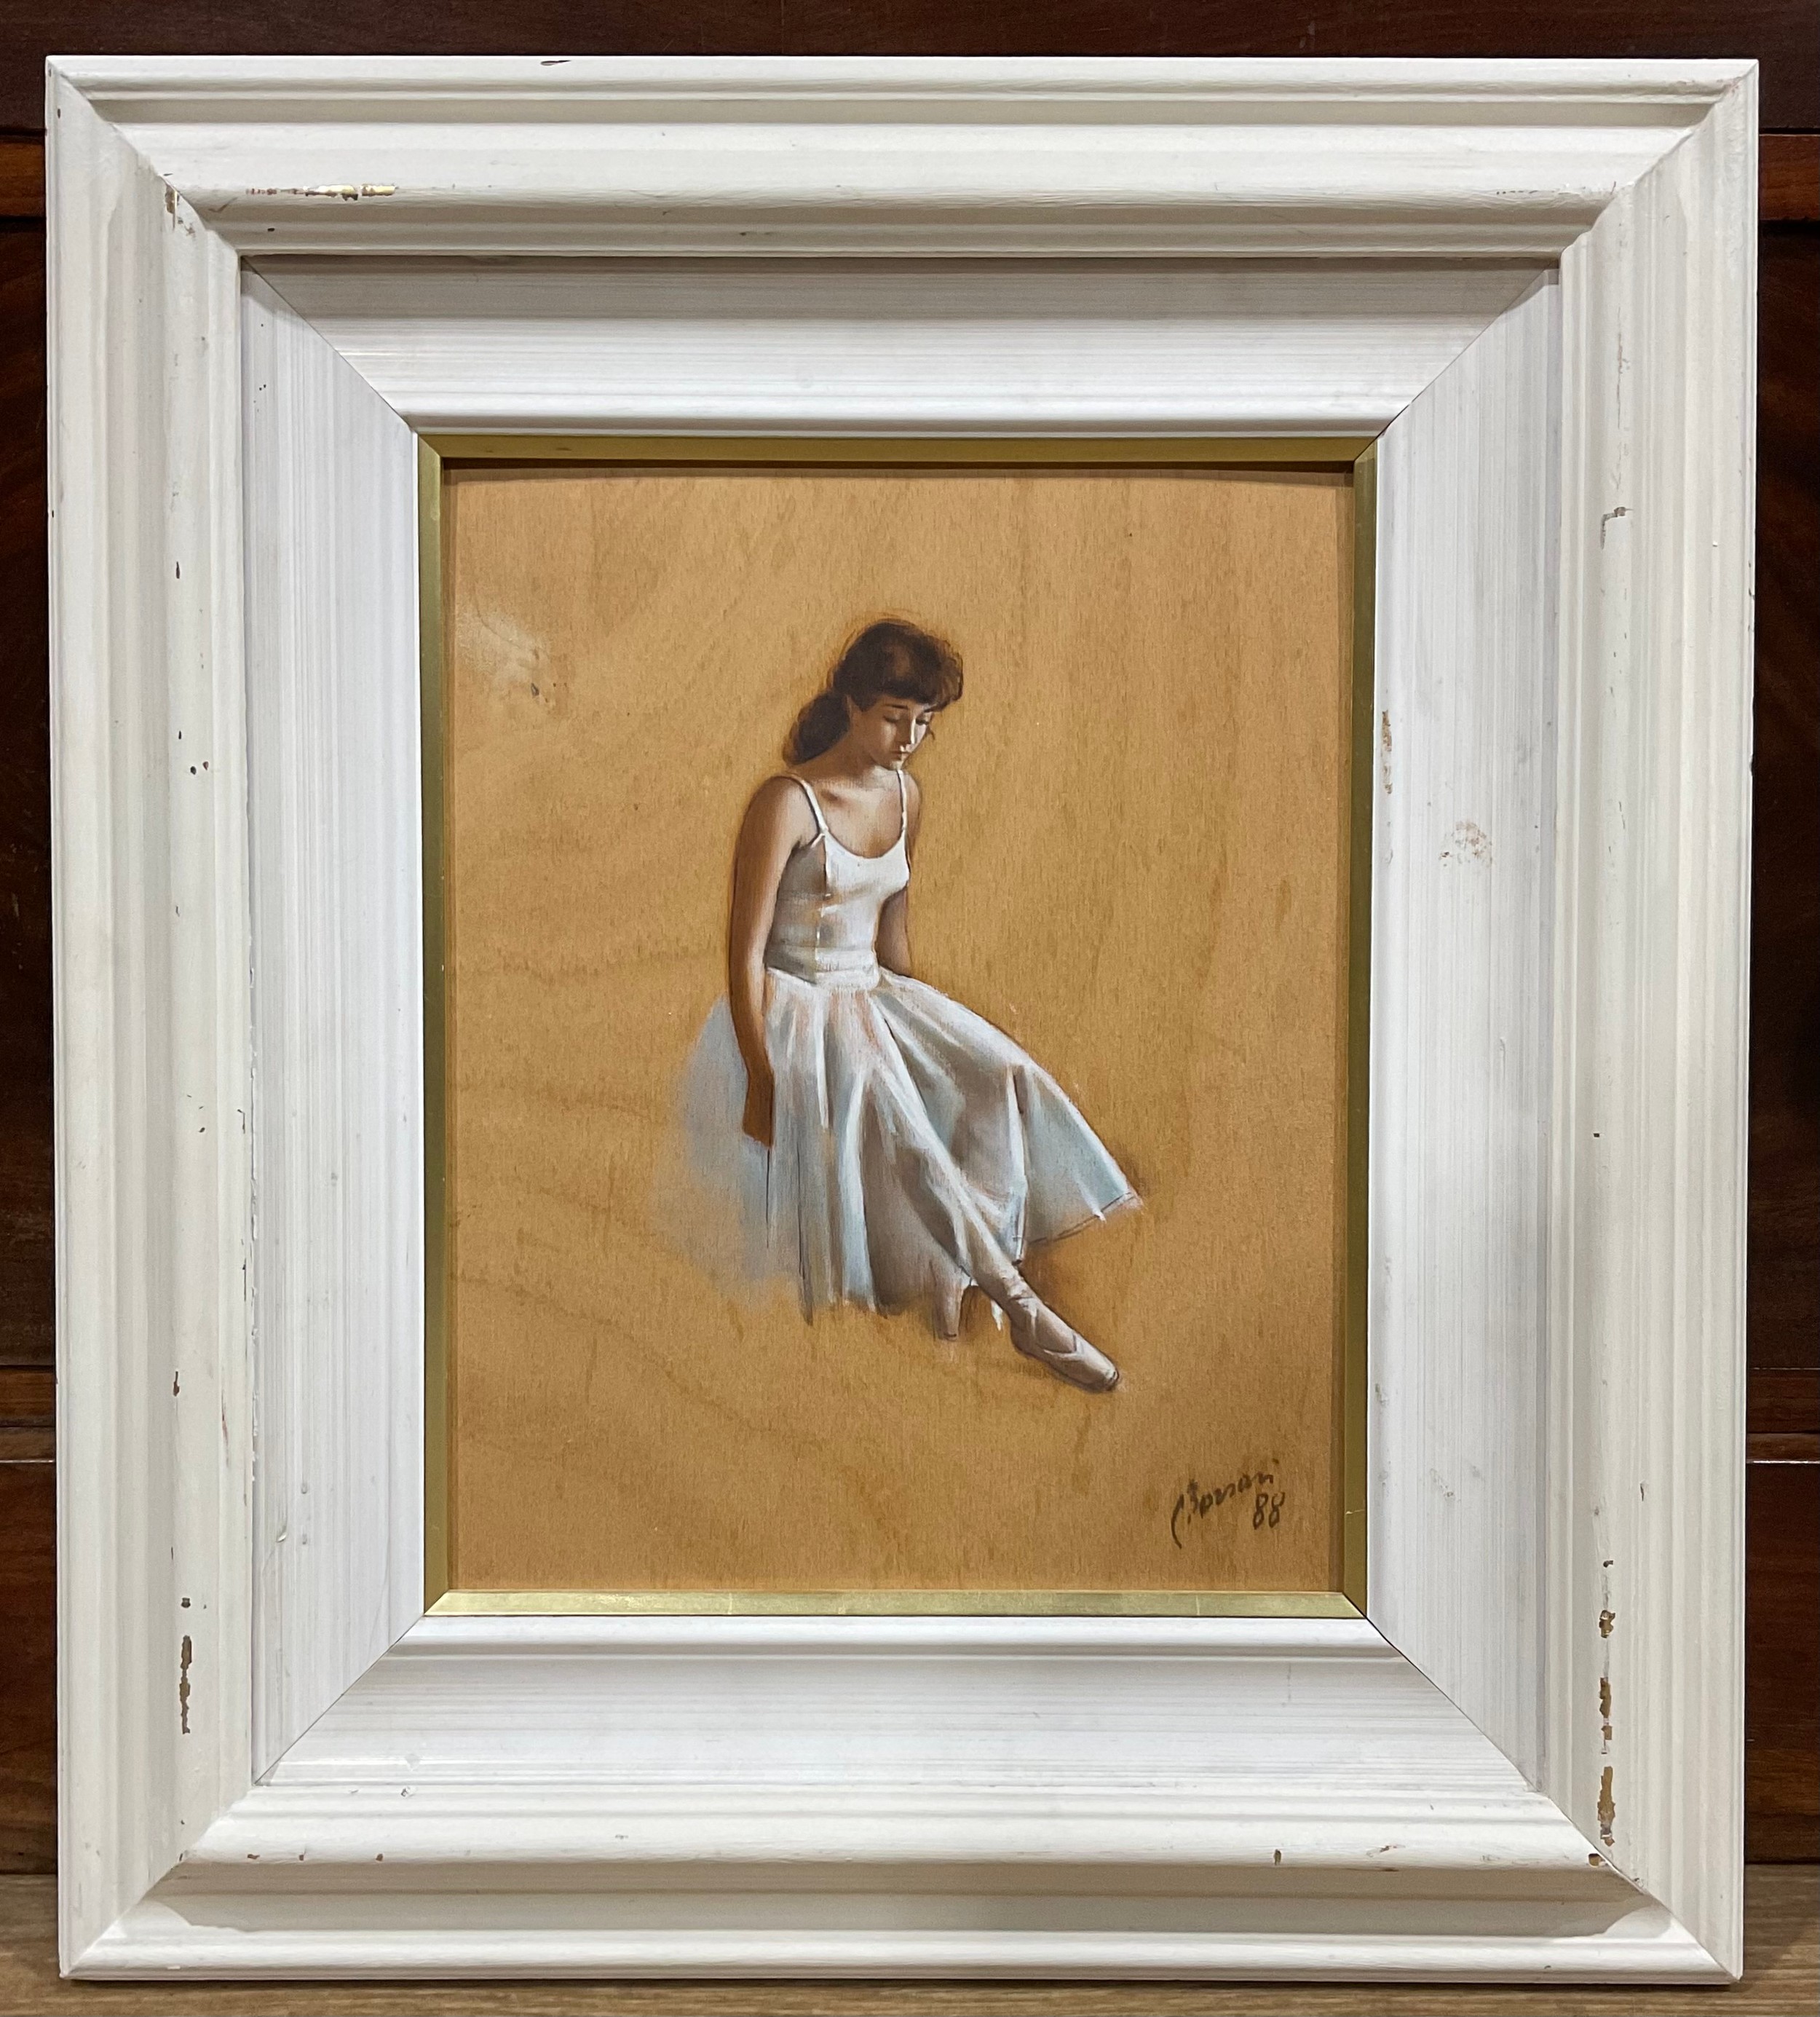 Italian School, Carlo Bossani Seated Ballerina signed, dated 1988, oil on wood, inscribed and signed - Image 2 of 3